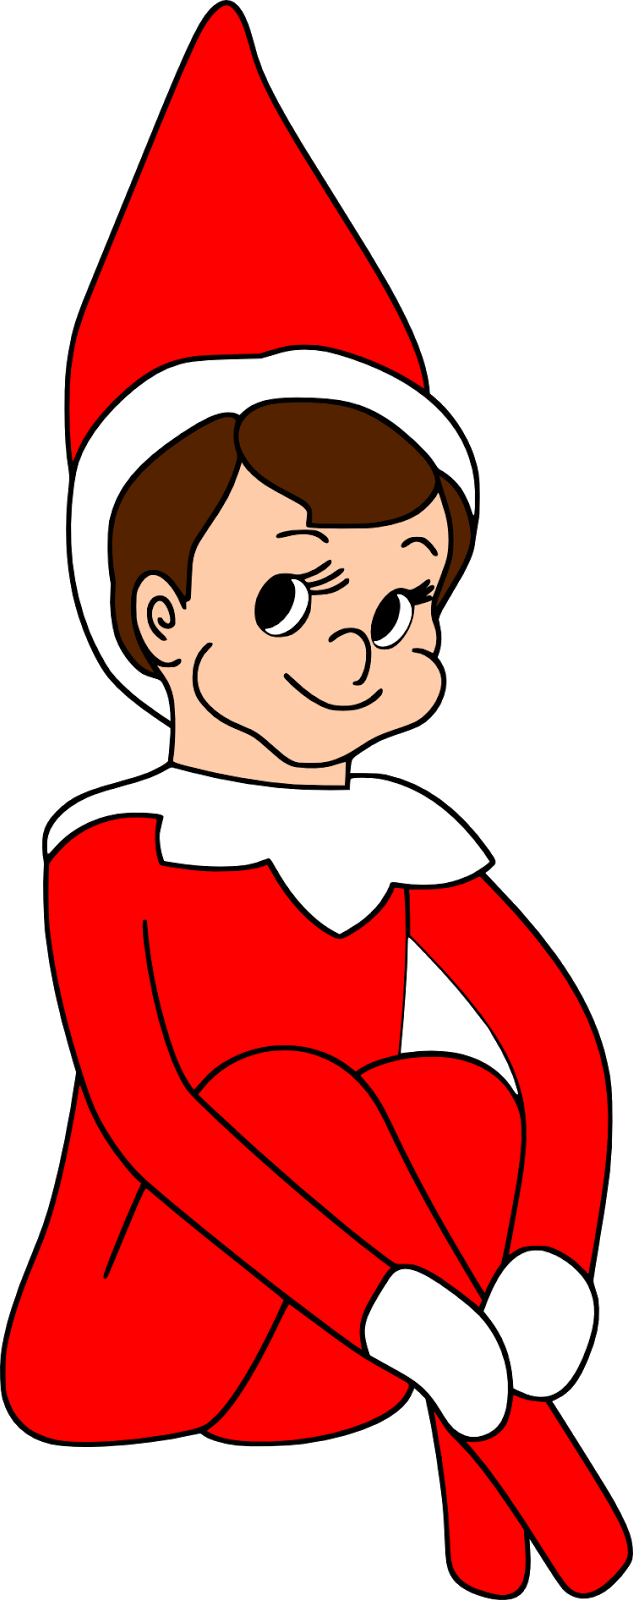 Crafting with Meek: Elf on the Shelf SVG